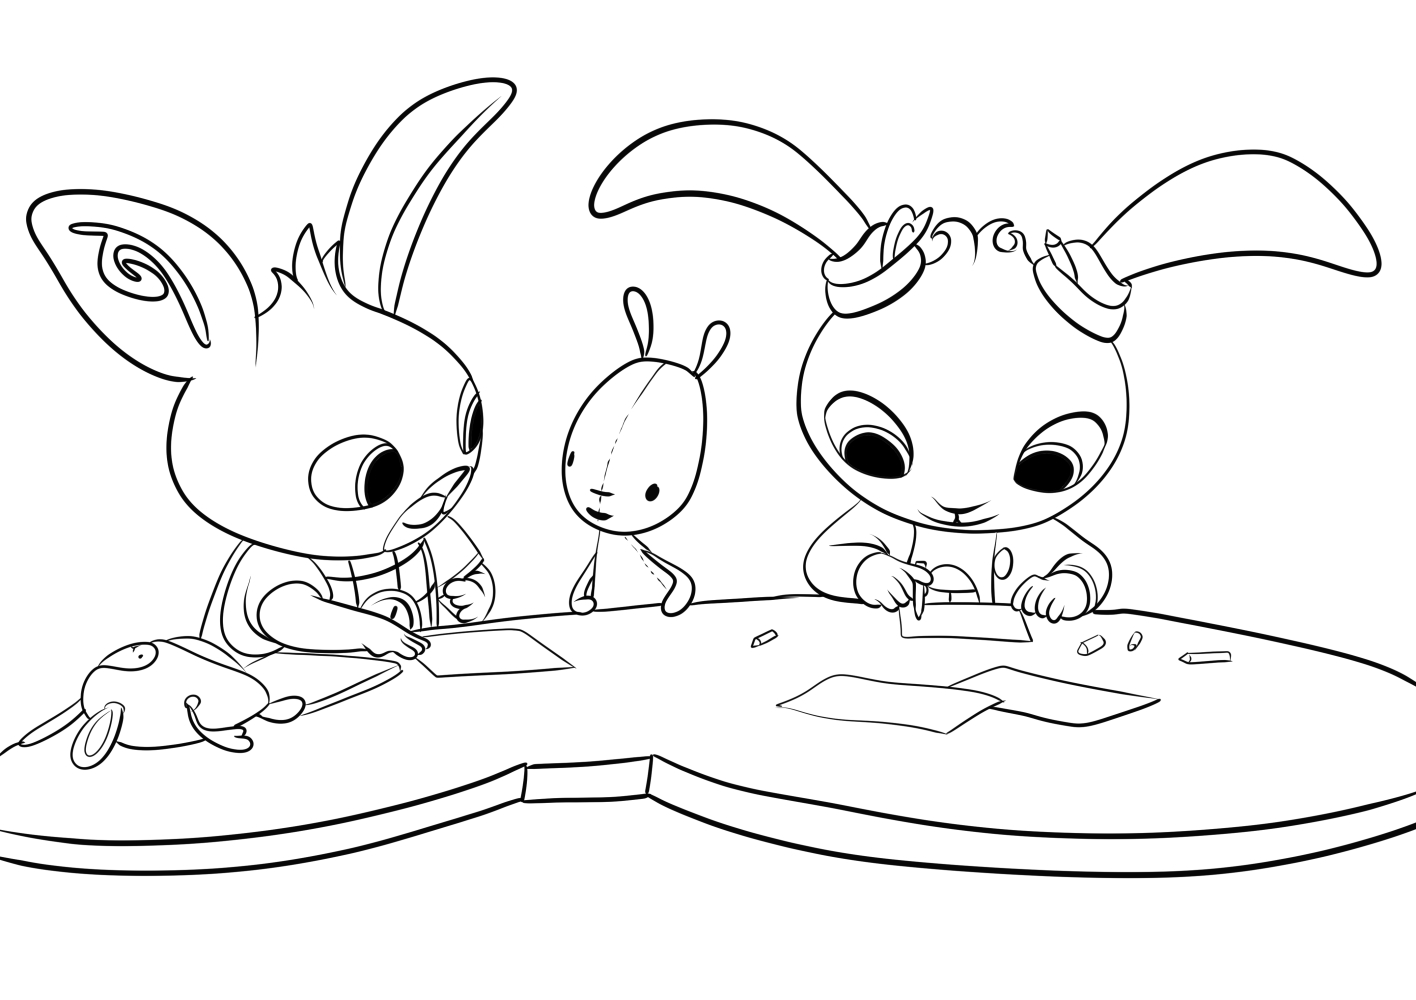 Bing, Flop, Coco  coloring page to print and coloring